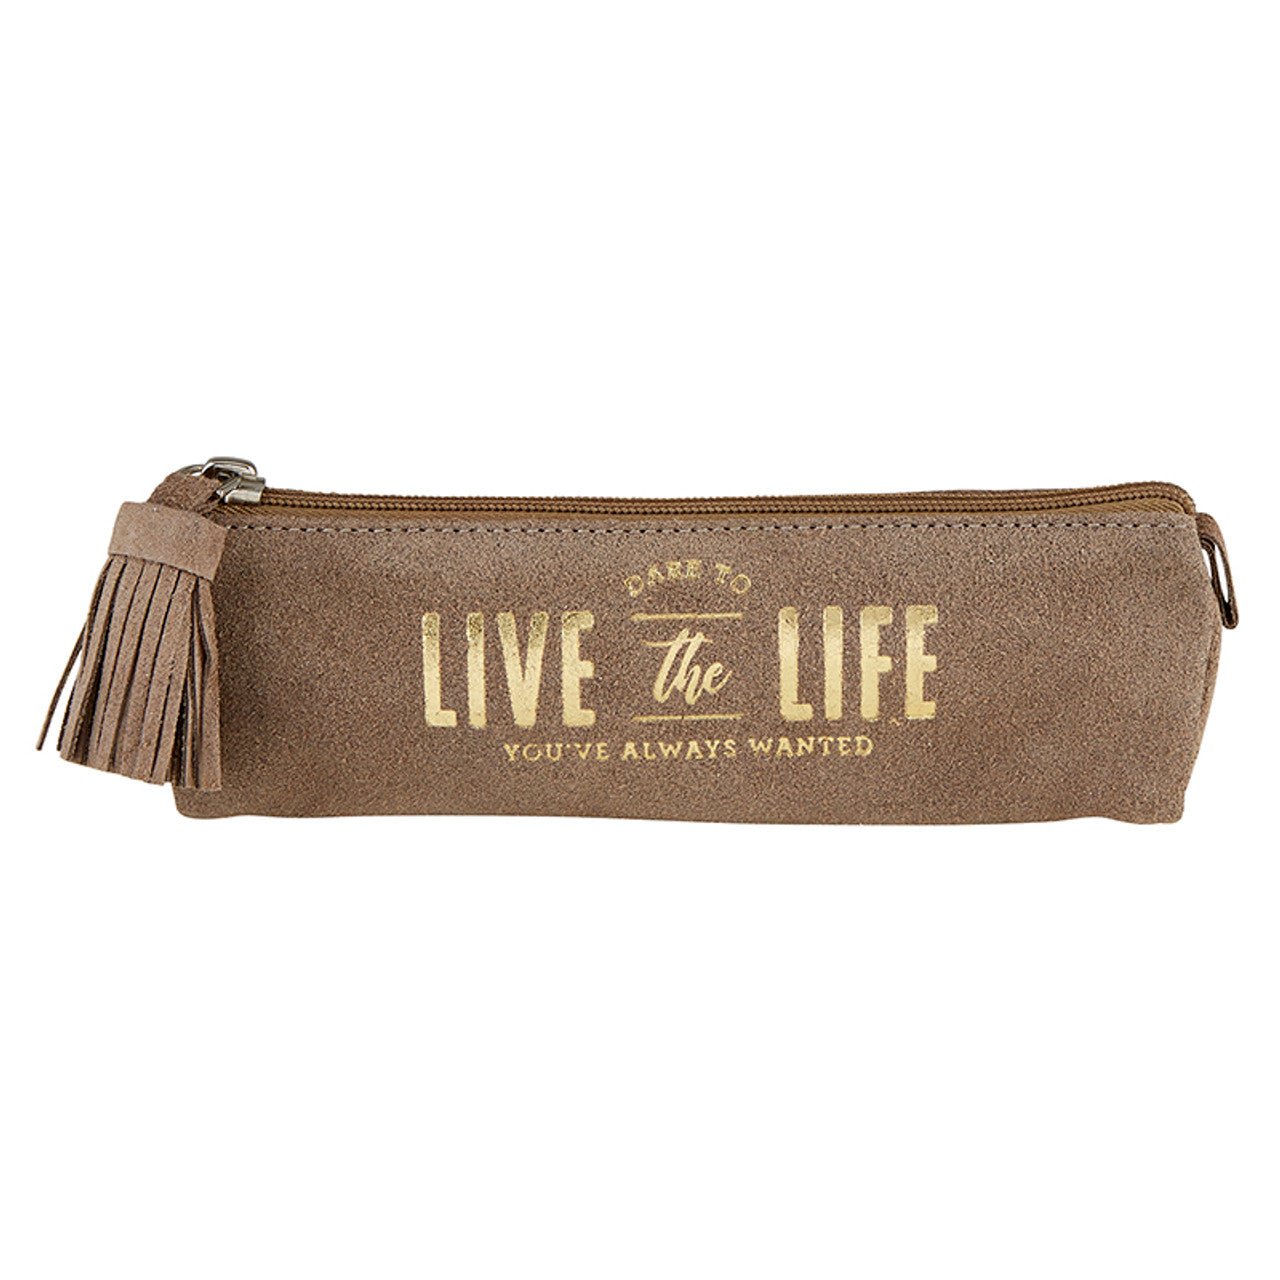 Christian Brands G2752 8 in. Rectangular Leather Pouch with Live The Life Design - Brown & GoldPack of 2